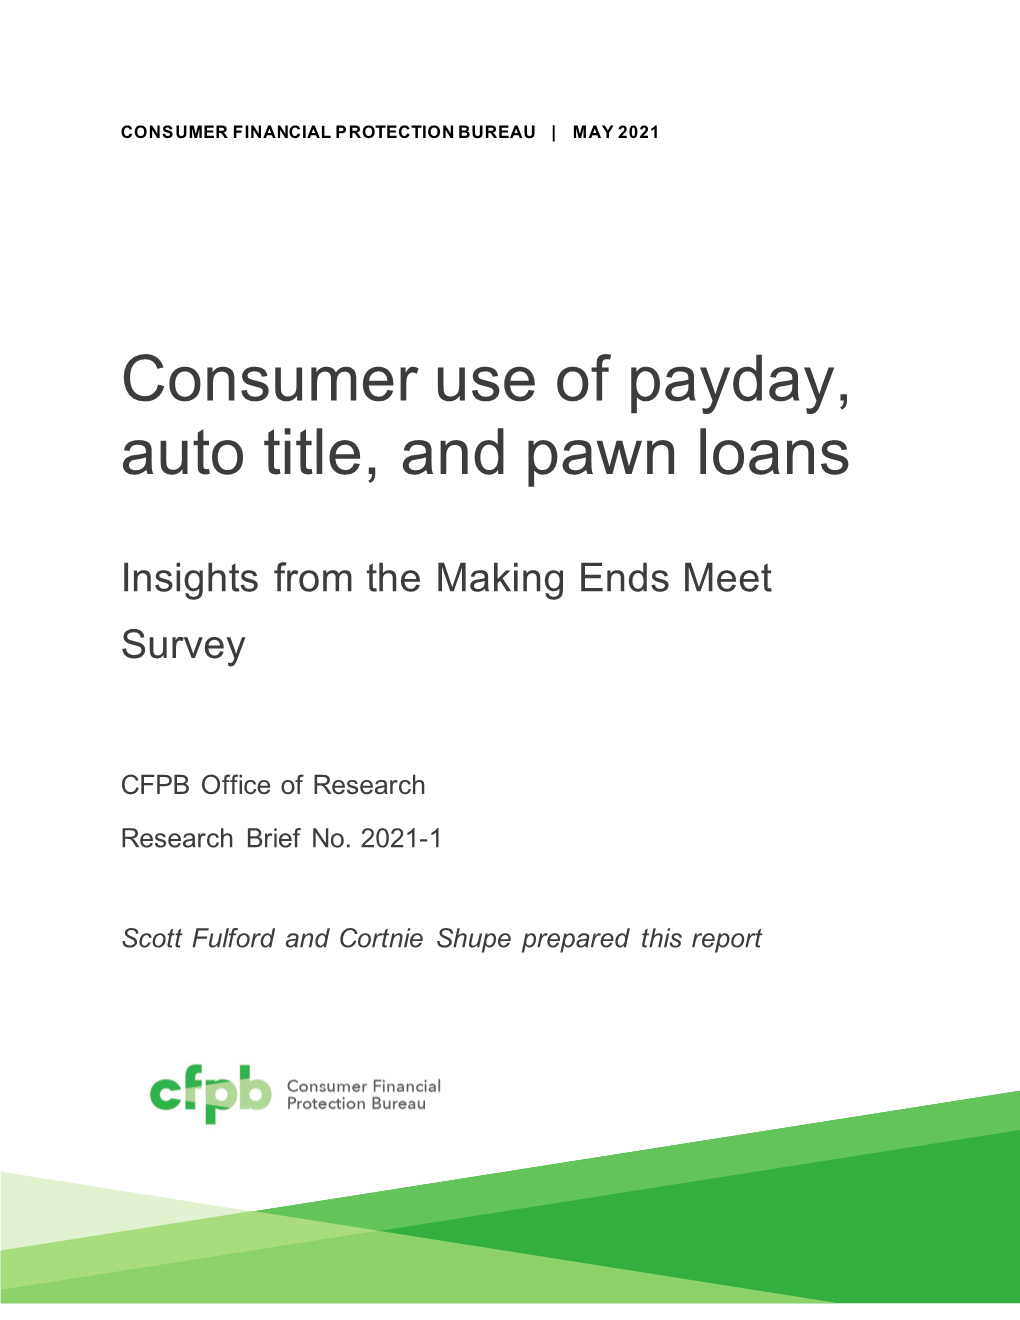 Consumer Use of Payday, Auto Title, and Pawn Loans